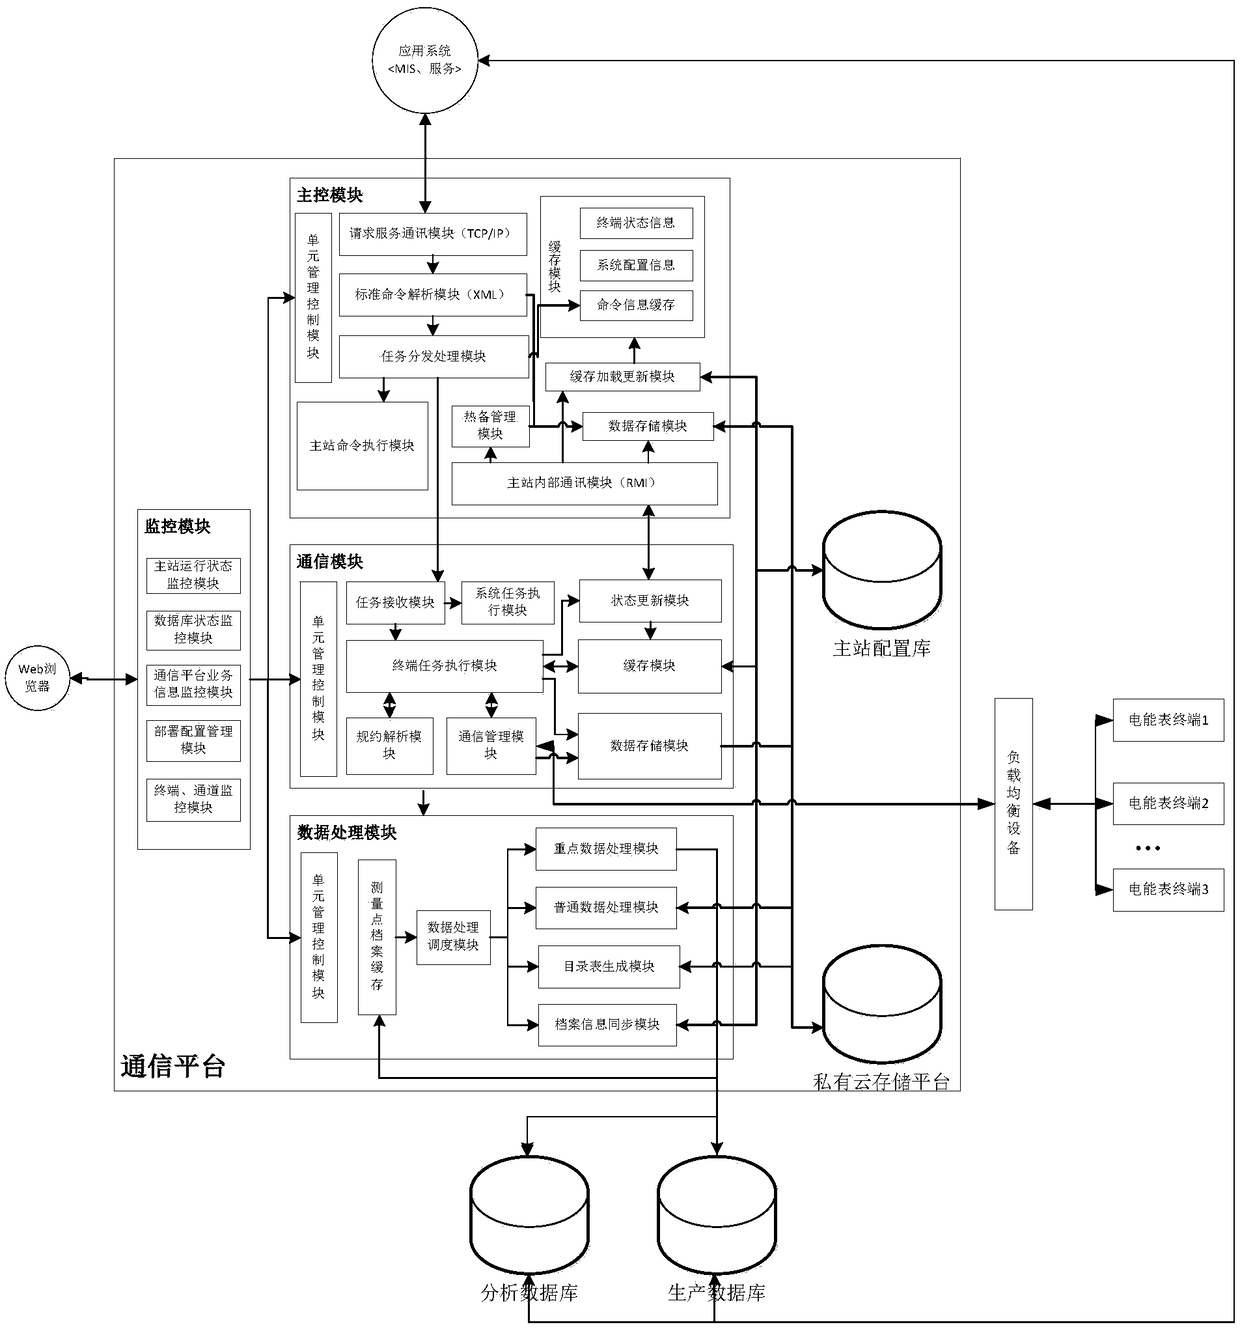 A data acquisition communication platform and a communication method for supporting direct mining of large-scale electric energy meters